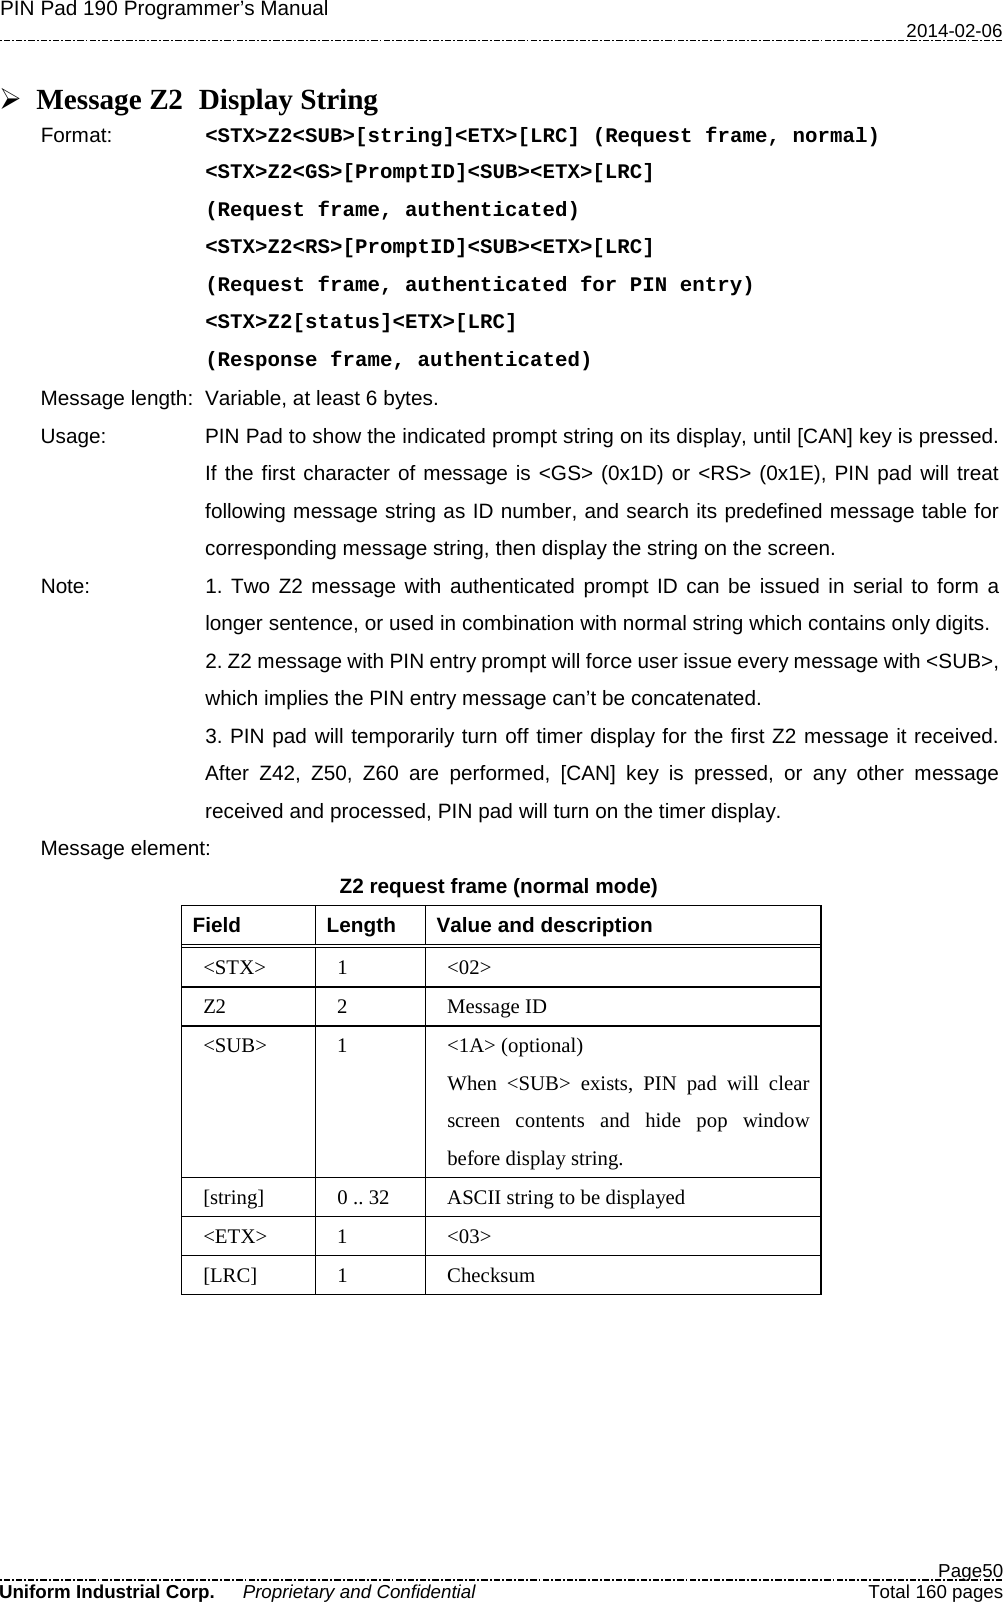 PIN Pad 190 Programmer’s Manual   2014-02-06  Page50 Uniform Industrial Corp. Proprietary and Confidential  Total 160 pages   Message Z2 Display String Format:   &lt;STX&gt;Z2&lt;SUB&gt;[string]&lt;ETX&gt;[LRC] (Request frame, normal) &lt;STX&gt;Z2&lt;GS&gt;[PromptID]&lt;SUB&gt;&lt;ETX&gt;[LRC]  (Request frame, authenticated) &lt;STX&gt;Z2&lt;RS&gt;[PromptID]&lt;SUB&gt;&lt;ETX&gt;[LRC]  (Request frame, authenticated for PIN entry) &lt;STX&gt;Z2[status]&lt;ETX&gt;[LRC]  (Response frame, authenticated) Message length: Variable, at least 6 bytes. Usage: PIN Pad to show the indicated prompt string on its display, until [CAN] key is pressed. If the first character of message is &lt;GS&gt; (0x1D) or &lt;RS&gt; (0x1E), PIN pad will treat following message string as ID number, and search its predefined message table for corresponding message string, then display the string on the screen. Note: 1. Two Z2 message with authenticated prompt ID can be issued in serial to form a longer sentence, or used in combination with normal string which contains only digits. 2. Z2 message with PIN entry prompt will force user issue every message with &lt;SUB&gt;, which implies the PIN entry message can’t be concatenated.   3. PIN pad will temporarily turn off timer display for the first Z2 message it received. After Z42, Z50, Z60 are performed, [CAN] key is pressed, or any other message received and processed, PIN pad will turn on the timer display. Message element:   Z2 request frame (normal mode) Field  Length  Value and description &lt;STX&gt;  1  &lt;02&gt; Z2  2  Message ID &lt;SUB&gt;  1  &lt;1A&gt; (optional) When &lt;SUB&gt; exists, PIN pad will clear screen contents and hide pop window before display string. [string]  0 .. 32 ASCII string to be displayed &lt;ETX&gt;  1  &lt;03&gt; [LRC]  1  Checksum  